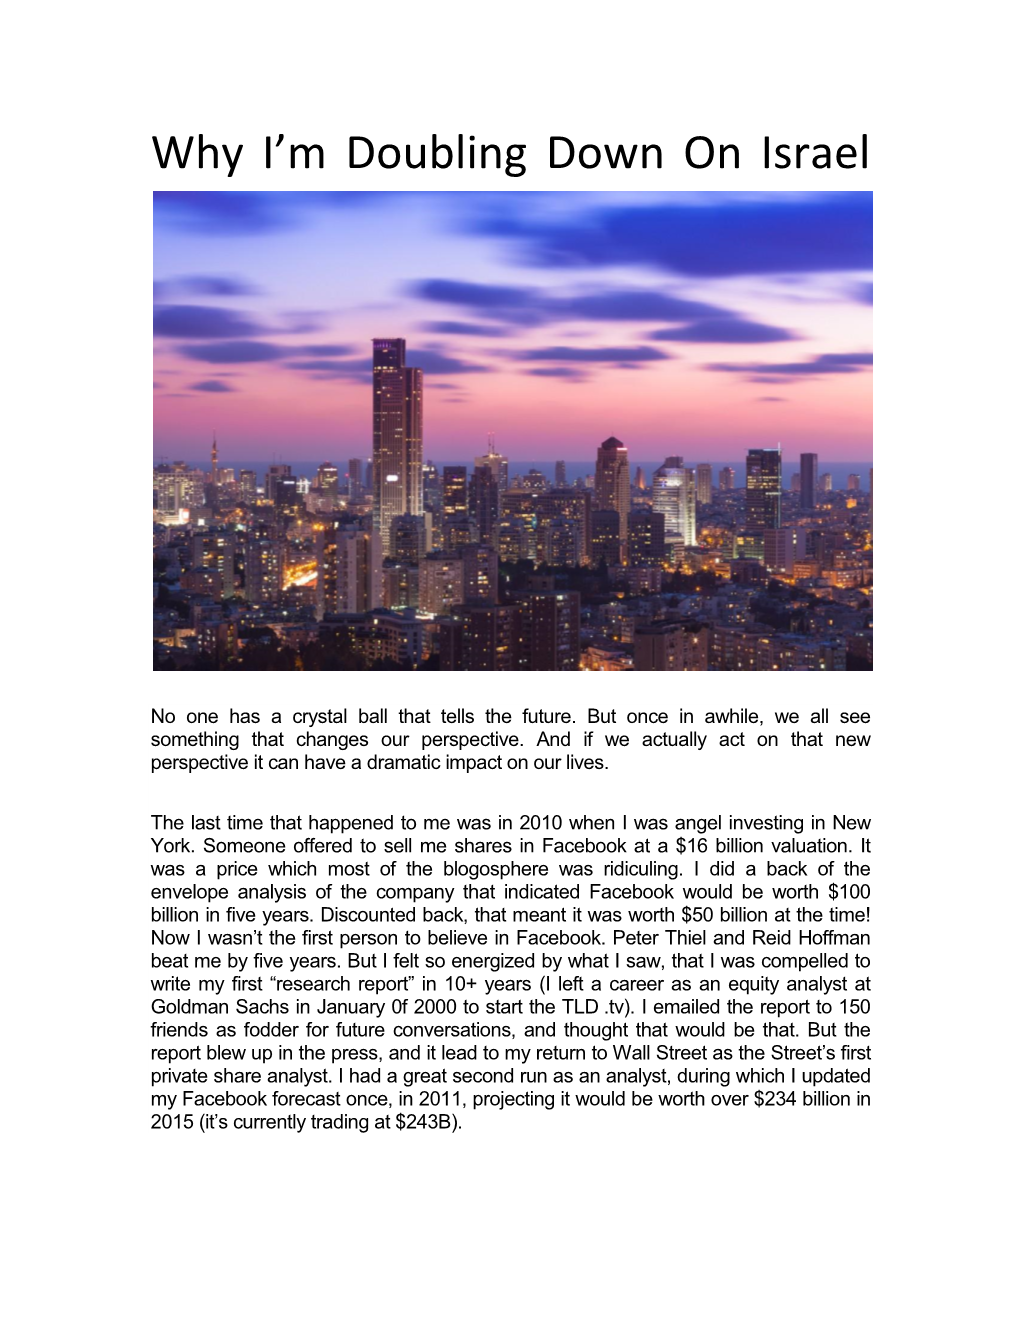 Why I'm Doubling Down on Israel